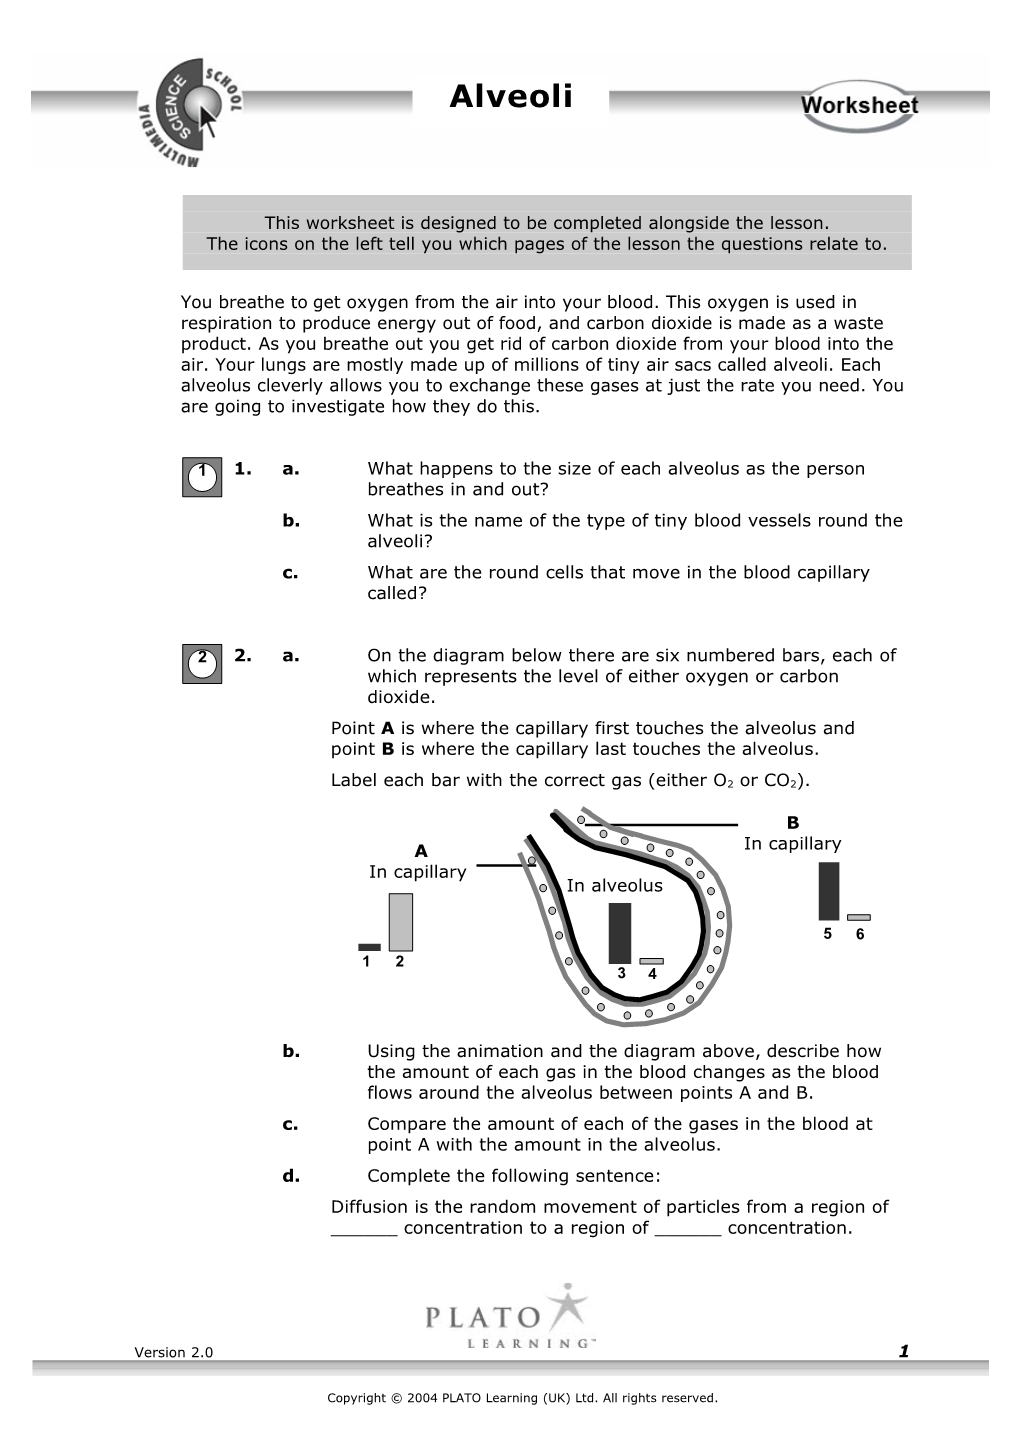 This Worksheet Is Designed to Be Completed Alongside the Lesson